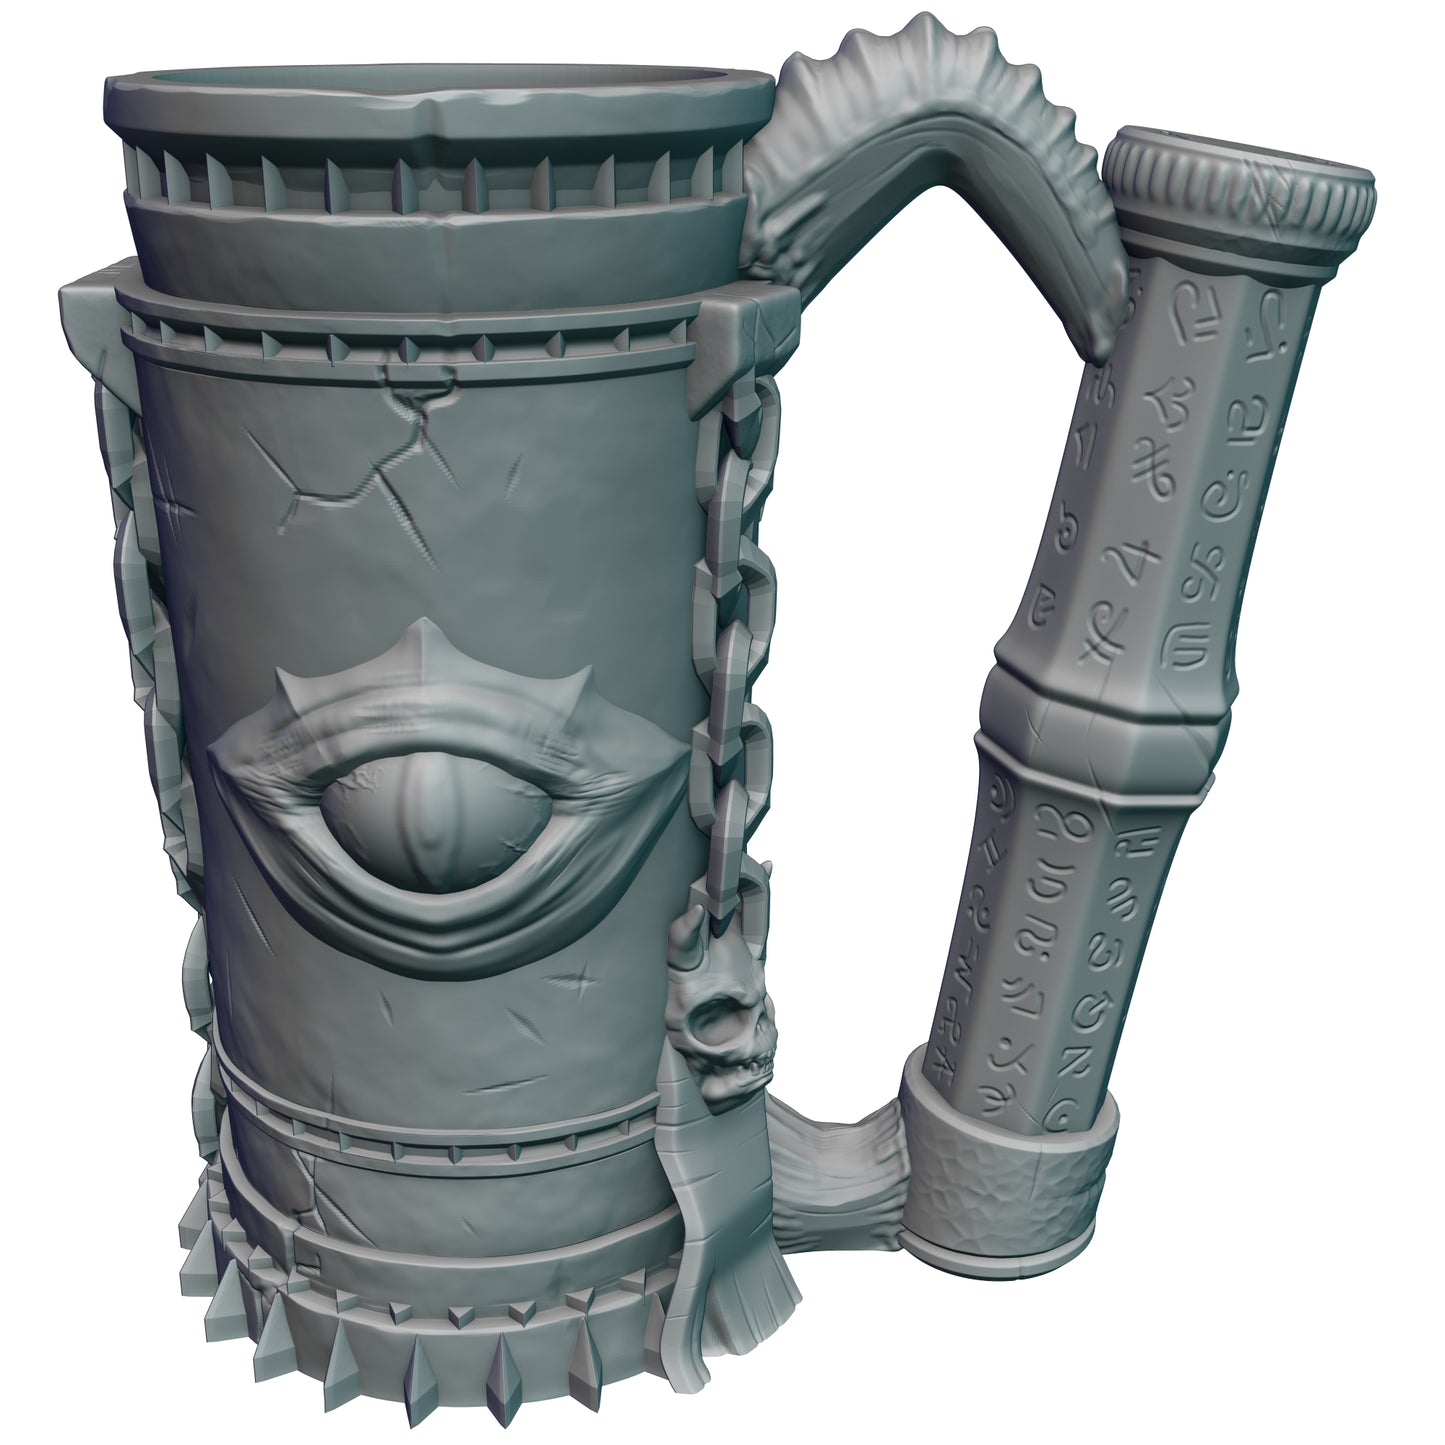 Warlock Gaming Mug with Twist-Off Cover: Dual-Purpose Dice and Beverage Can Holder